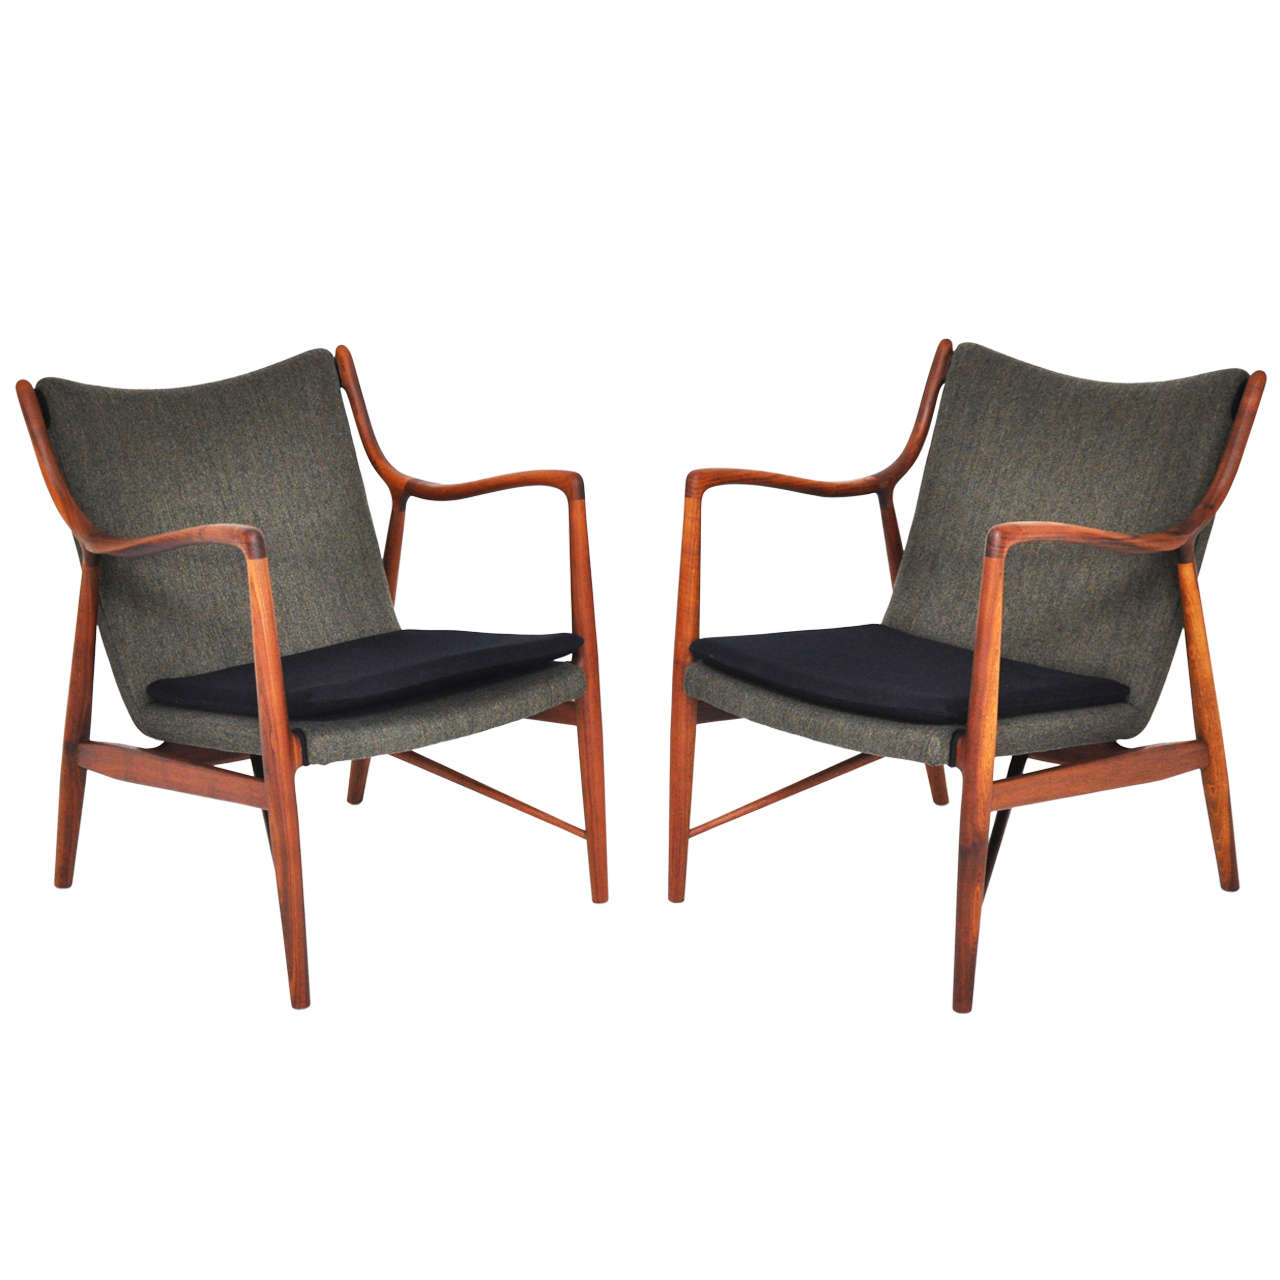 Model 45 chairs designed by Finn Juhl and produced by Baker.  Fully restored.  Natural walnut frames with oil rubbed finish.  New wool upholstery.